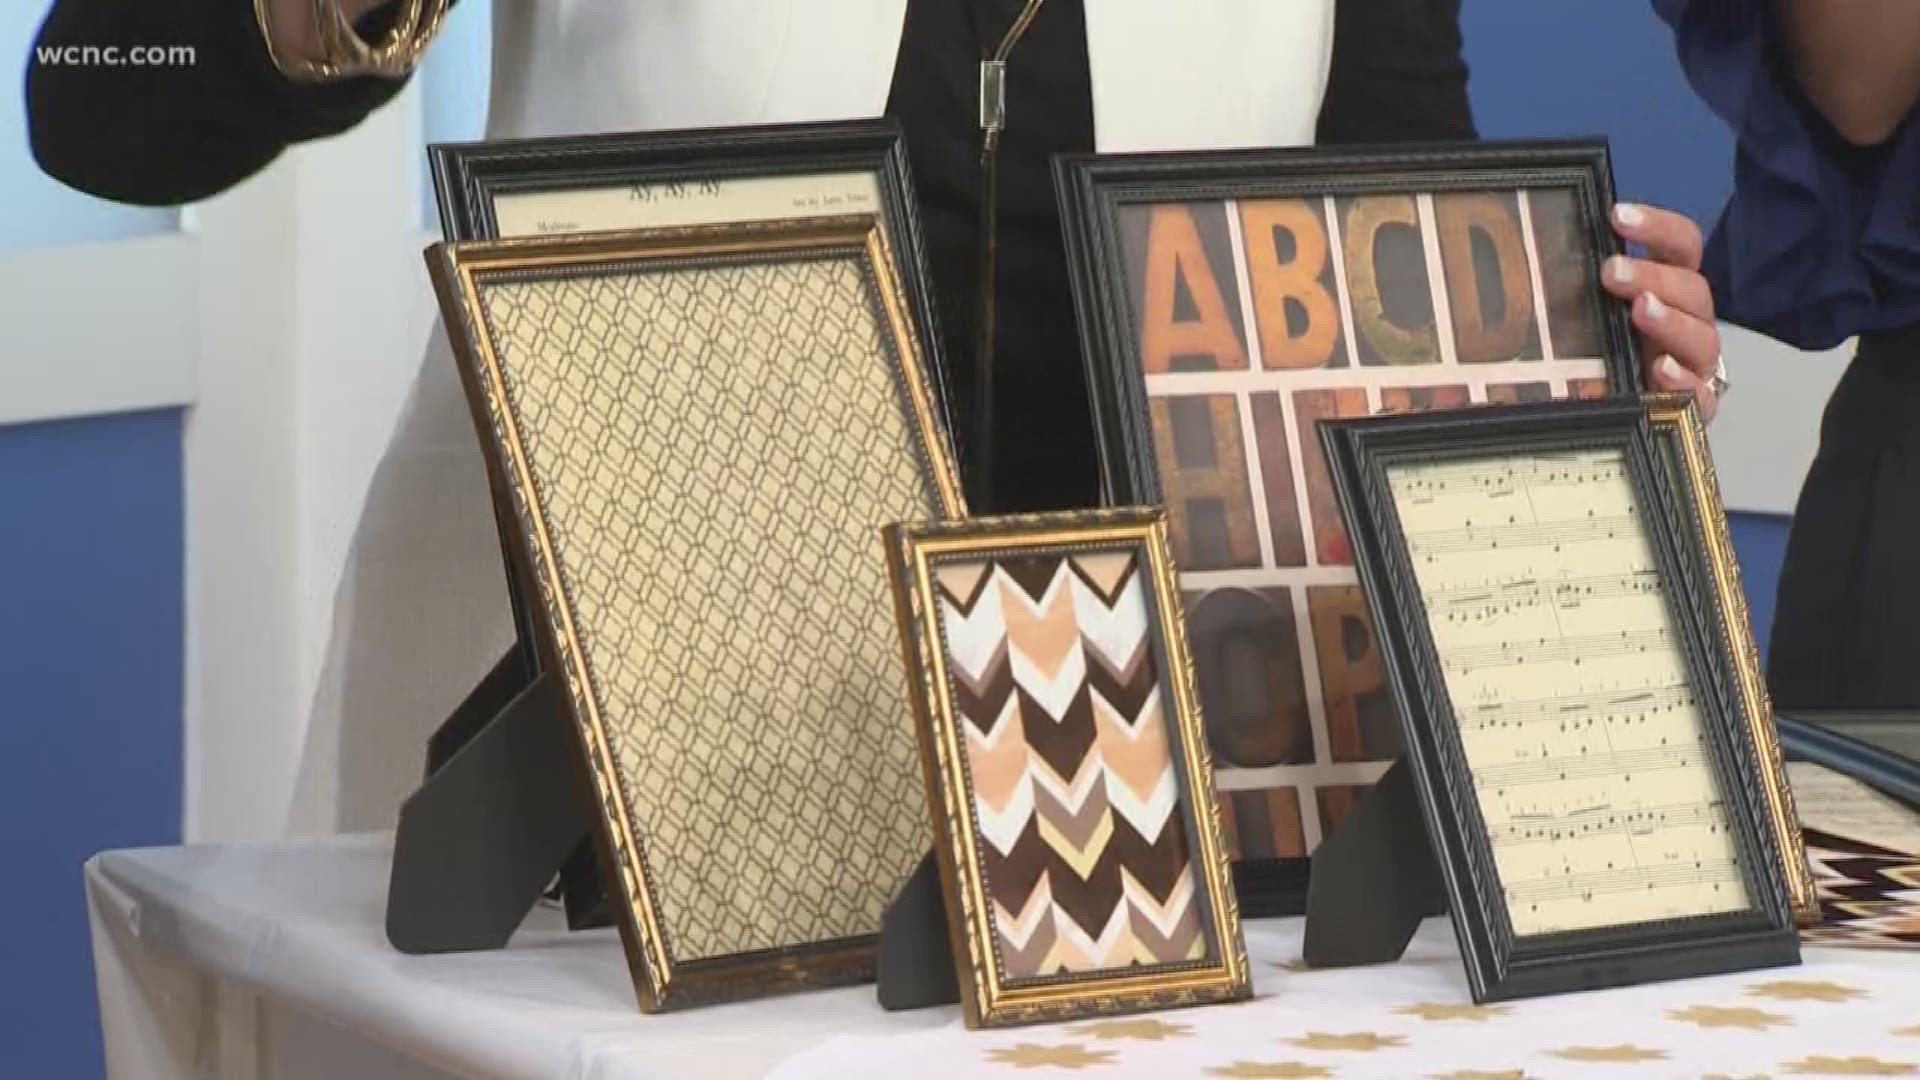 Lifestyle expert Julie Loven shows us how to make beautiful wall art and table décor for cheap.